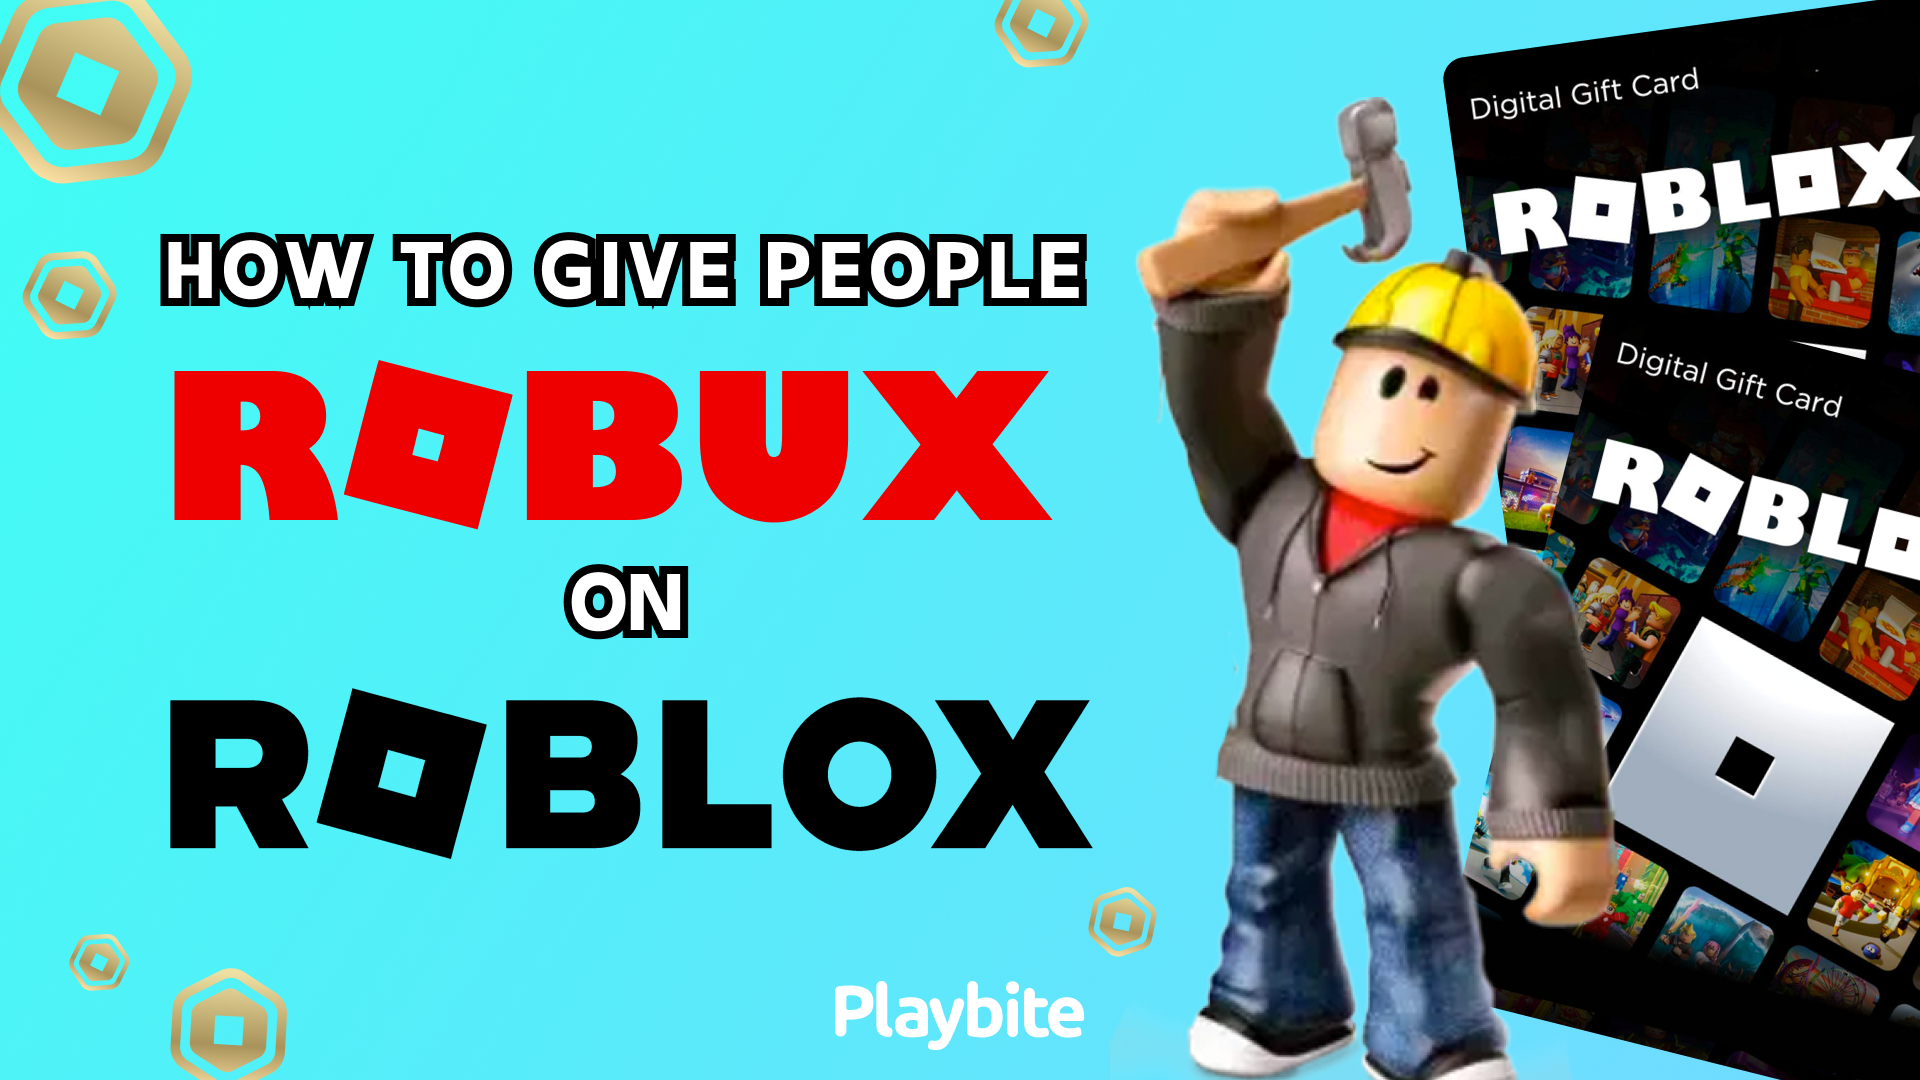 How To Give People Robux On Roblox - Playbite